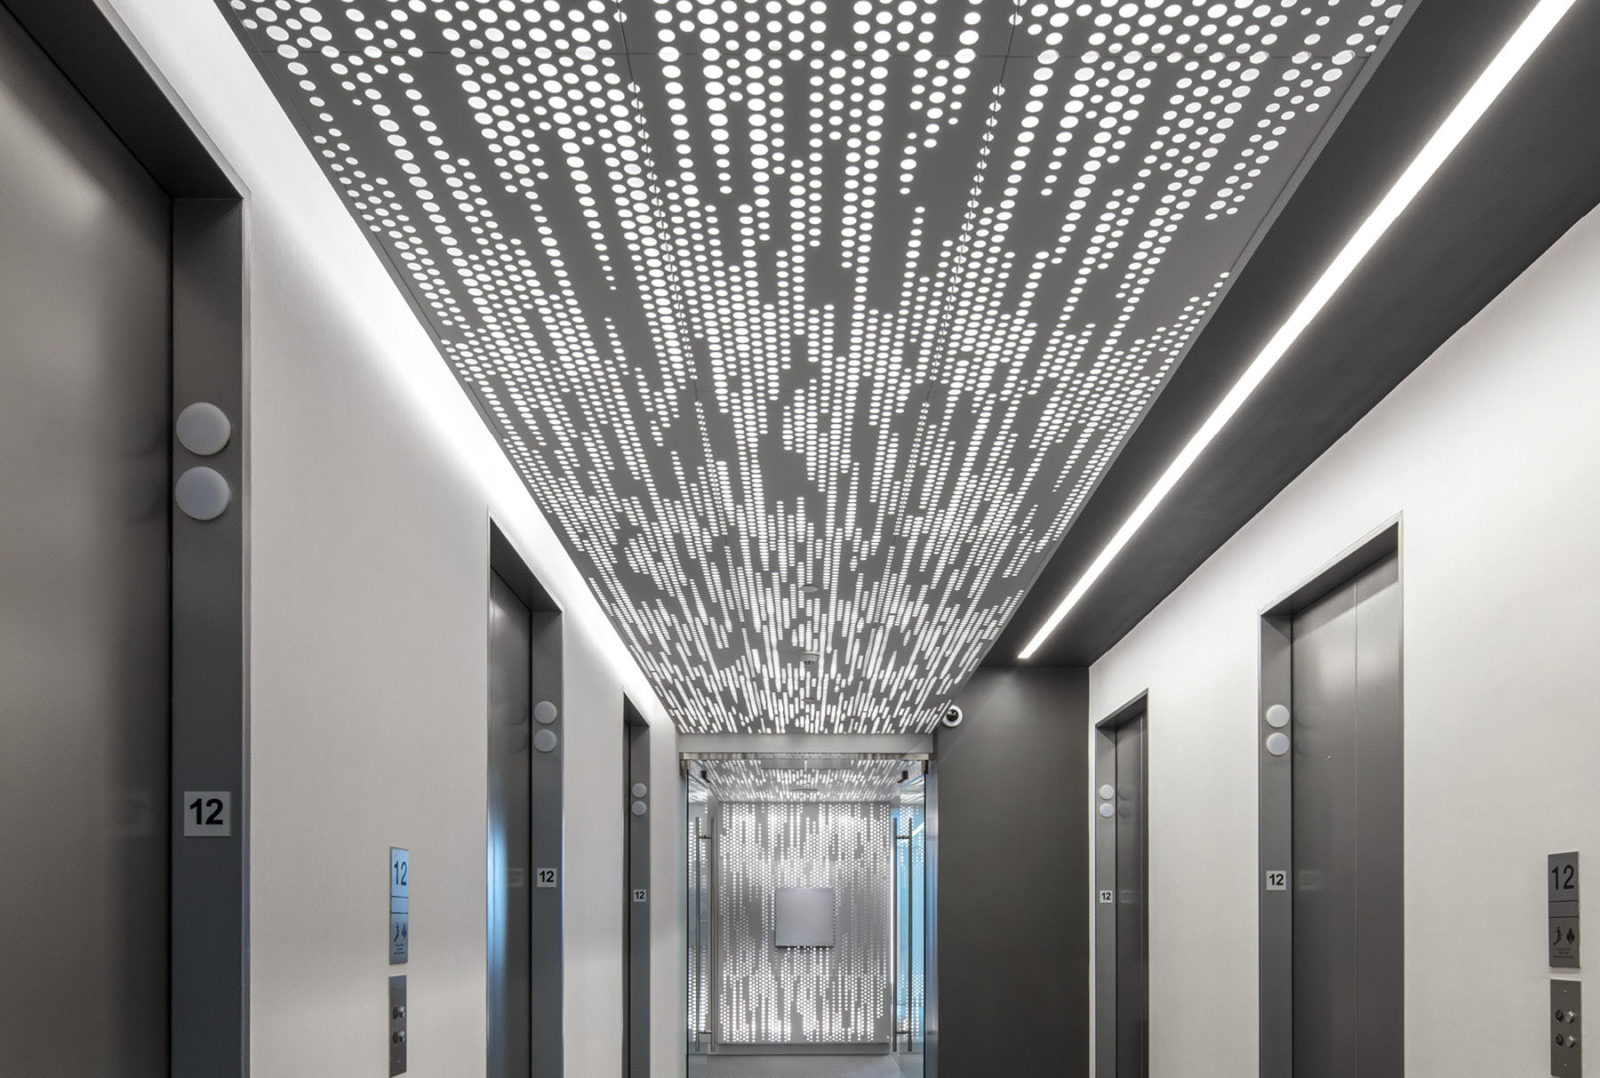 Vapor Trail with backlight installed in elevator lobby.